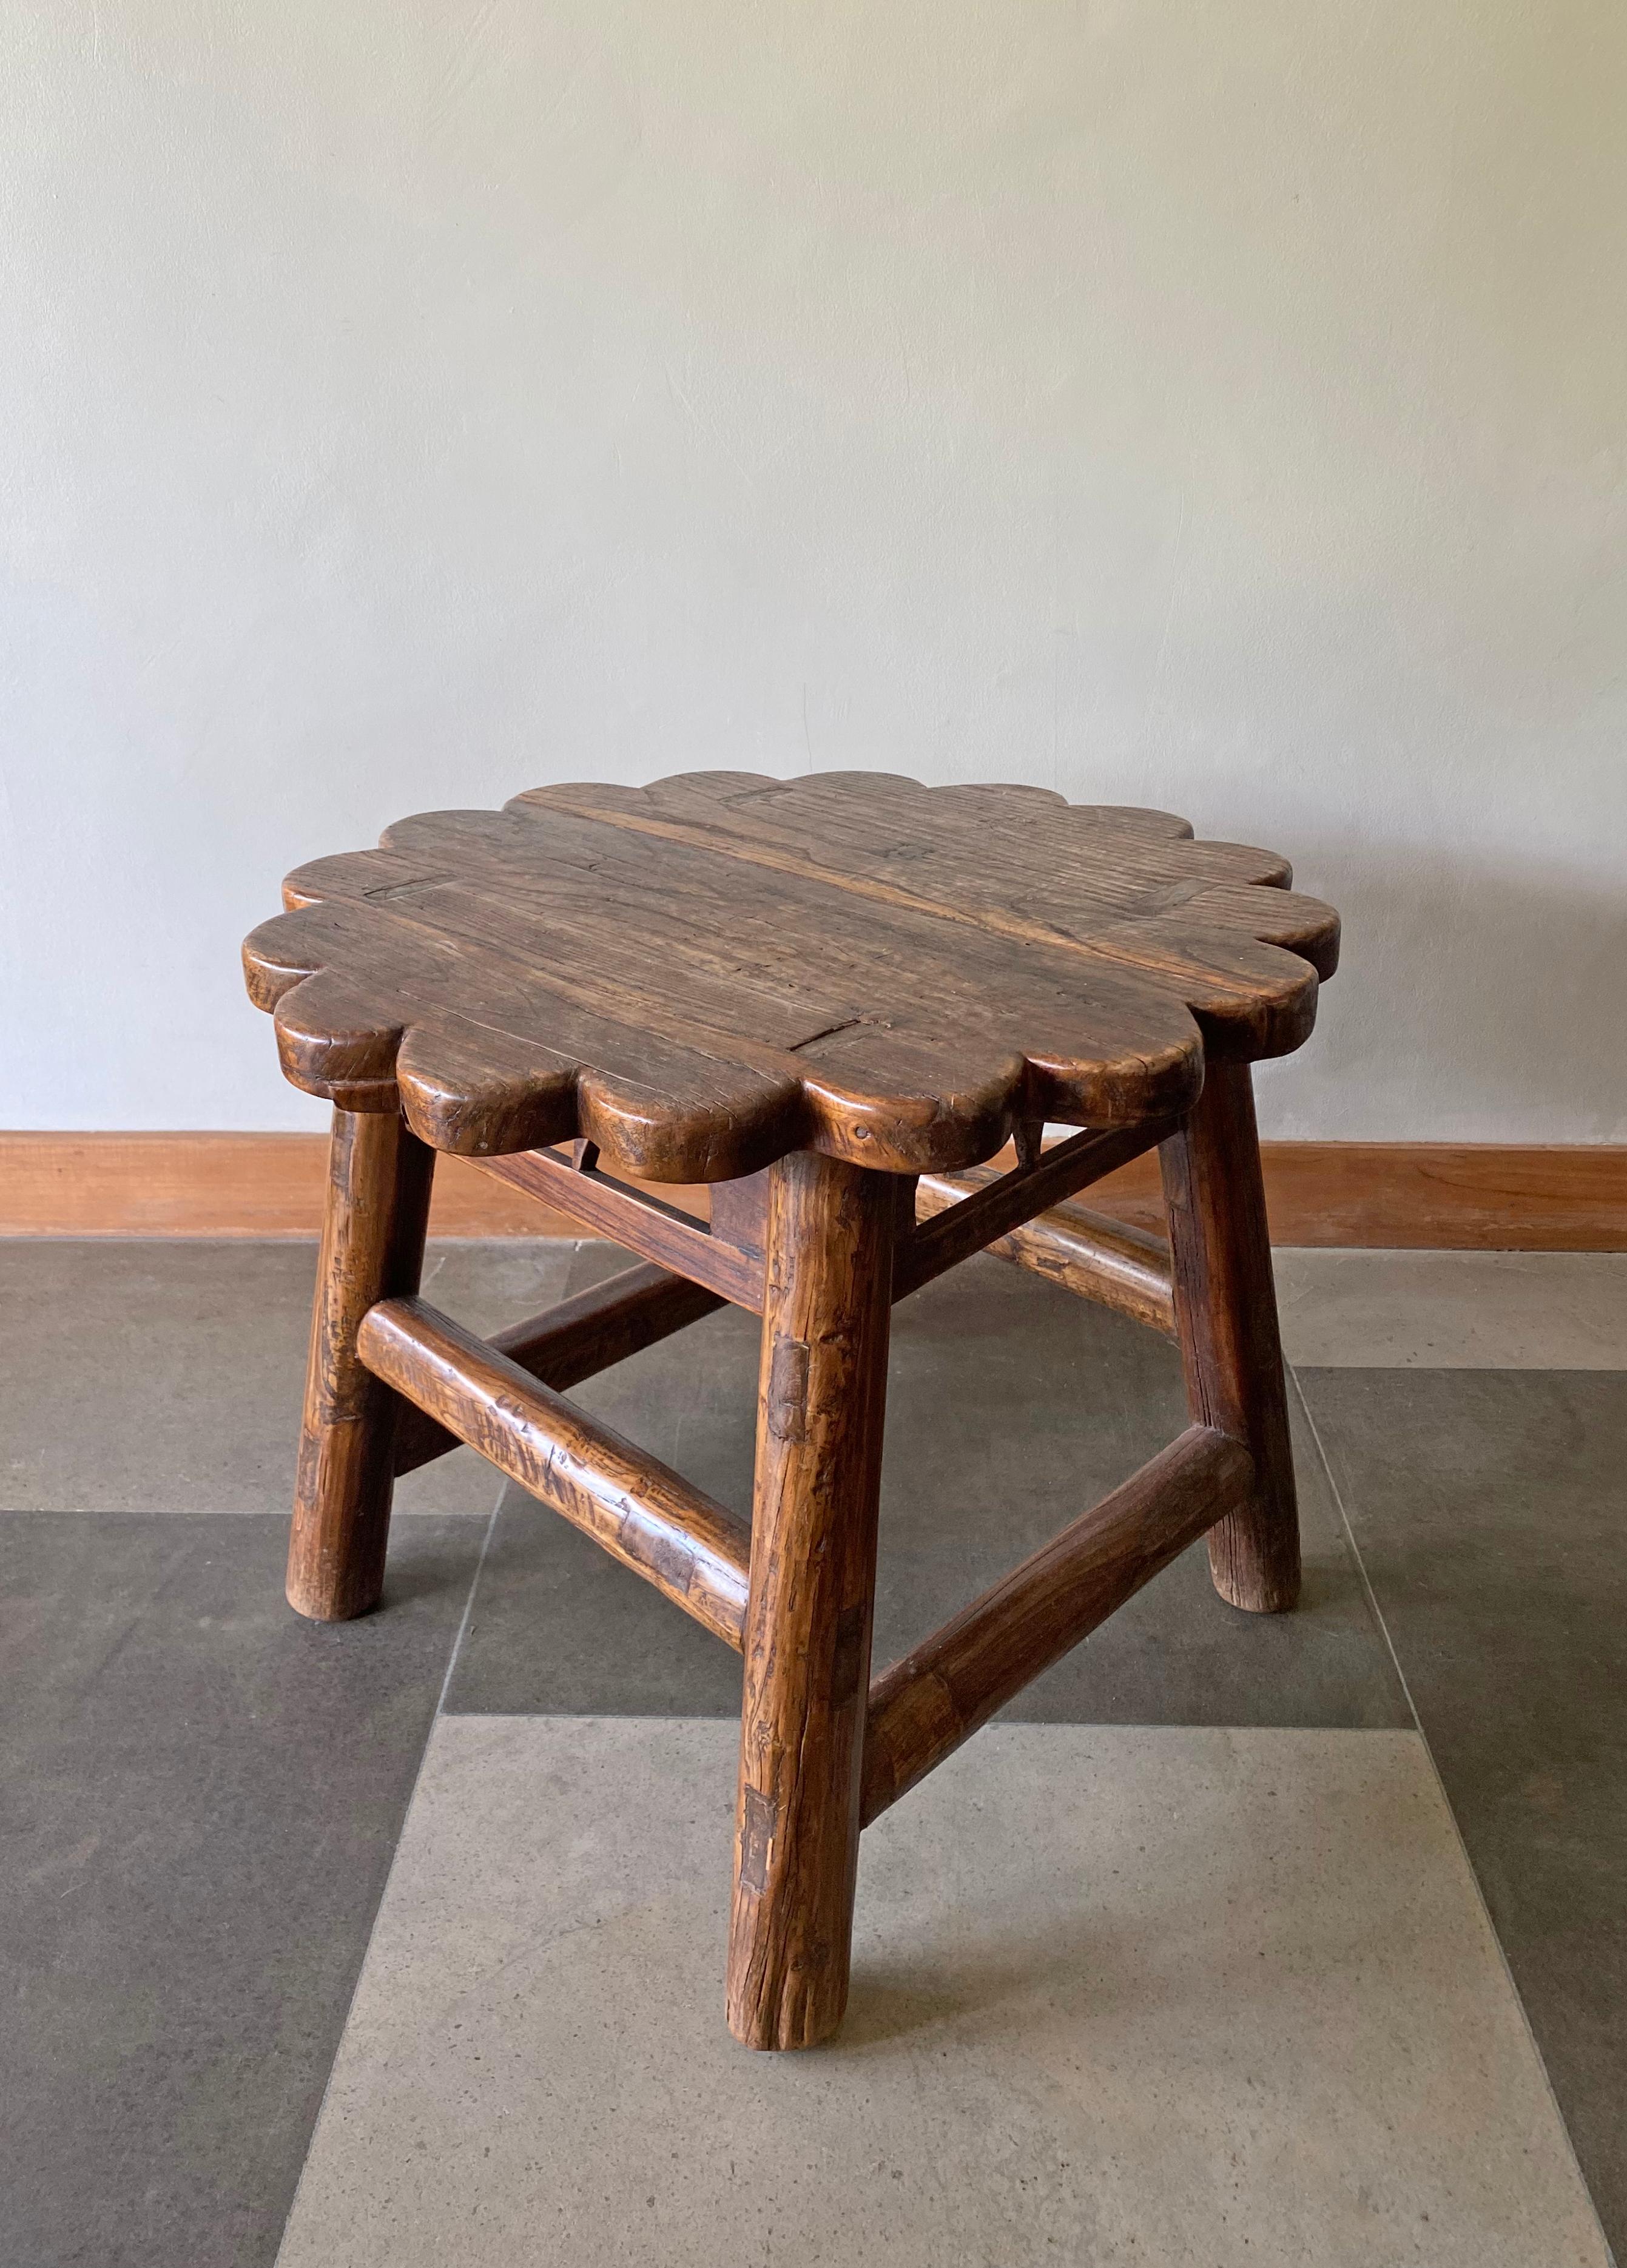 This antique elm wood lacquered stool comes from China's Hubei province. Crafted using only wooden joints it features a floral shape and subtle detailing across its upper horizontal joints. 

Dimensions: Height 49.5cm x Diameter 59cm.